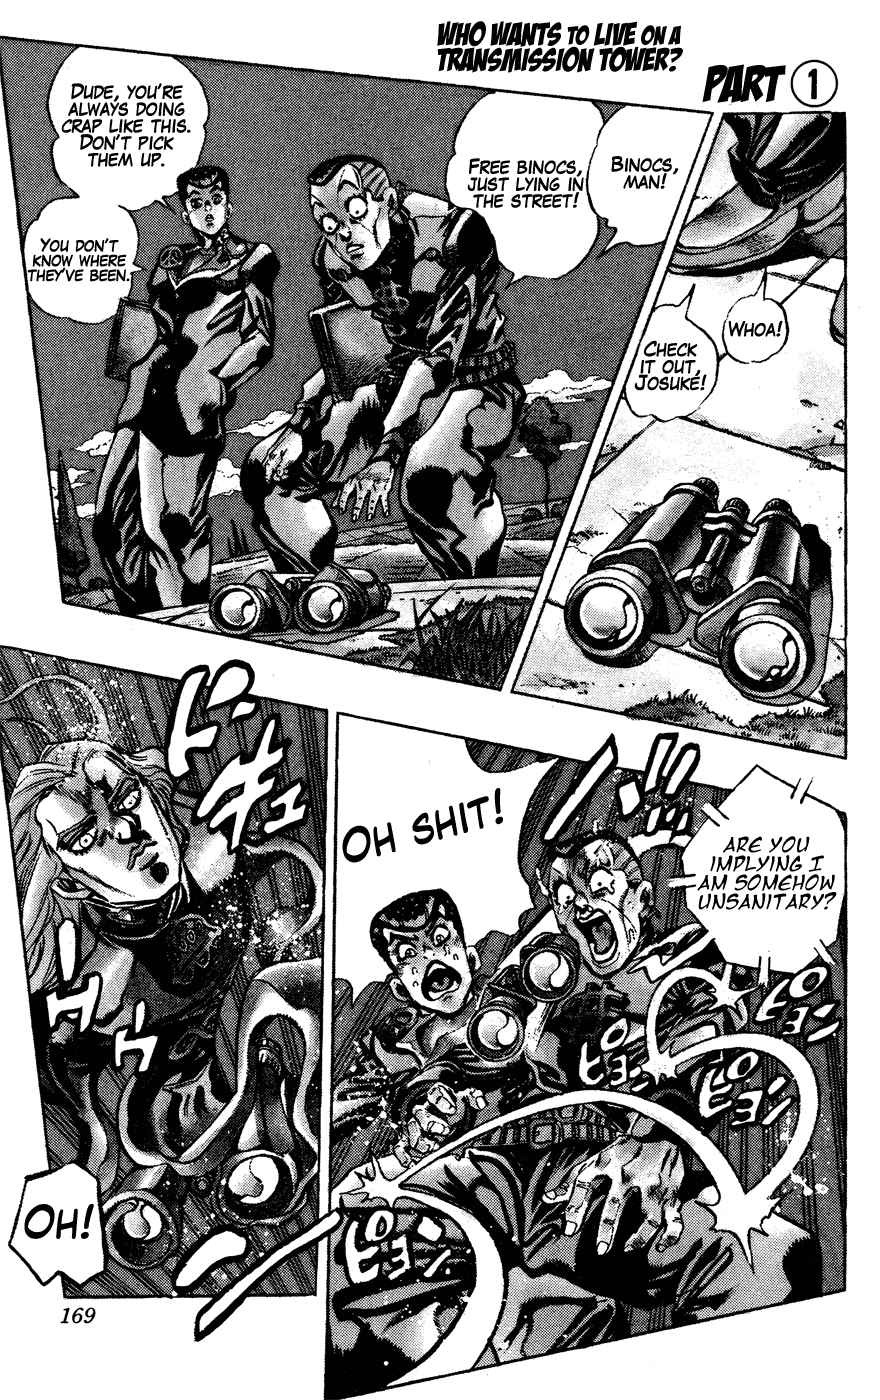 JoJo's Bizarre Adventure Part 4 Diamond is Unbreakable Vol. 14 Ch. 133 Who Wants to Live on a Transmission Tower? Part 1